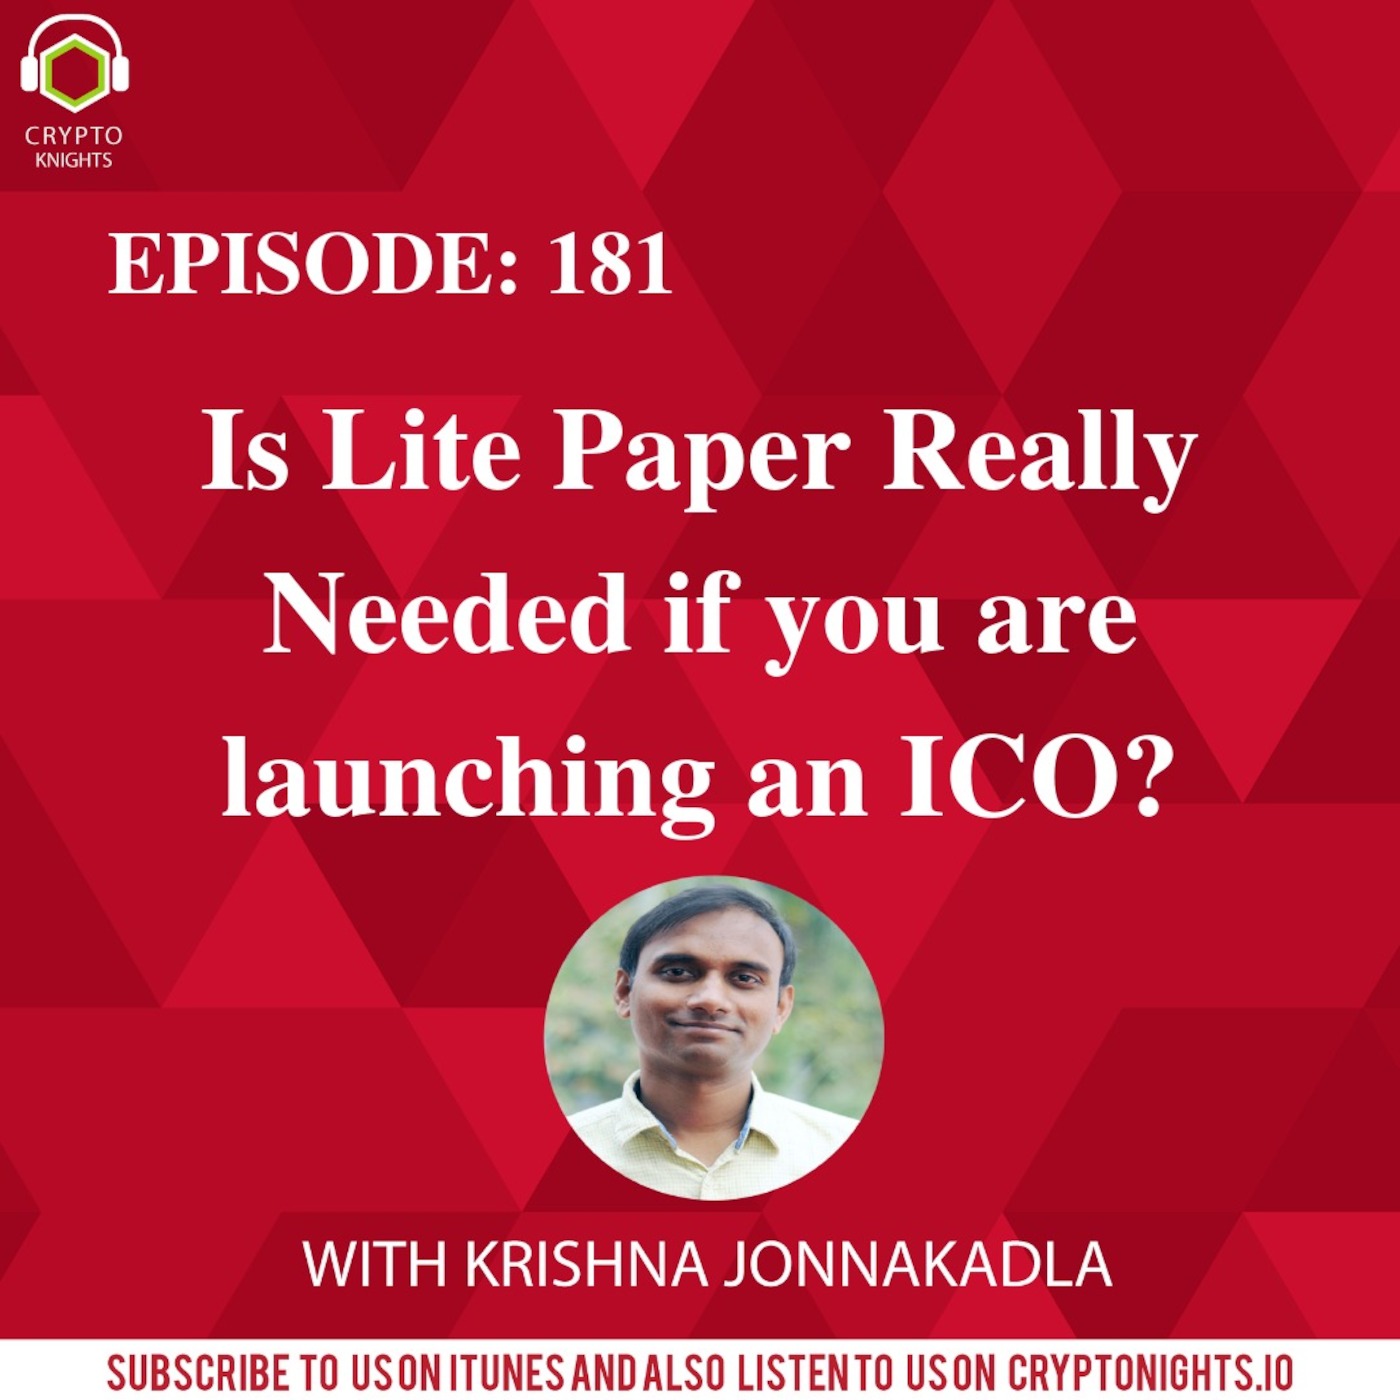 Episode 181 - Is Lite Paper Really Needed if you are launching an ICO?